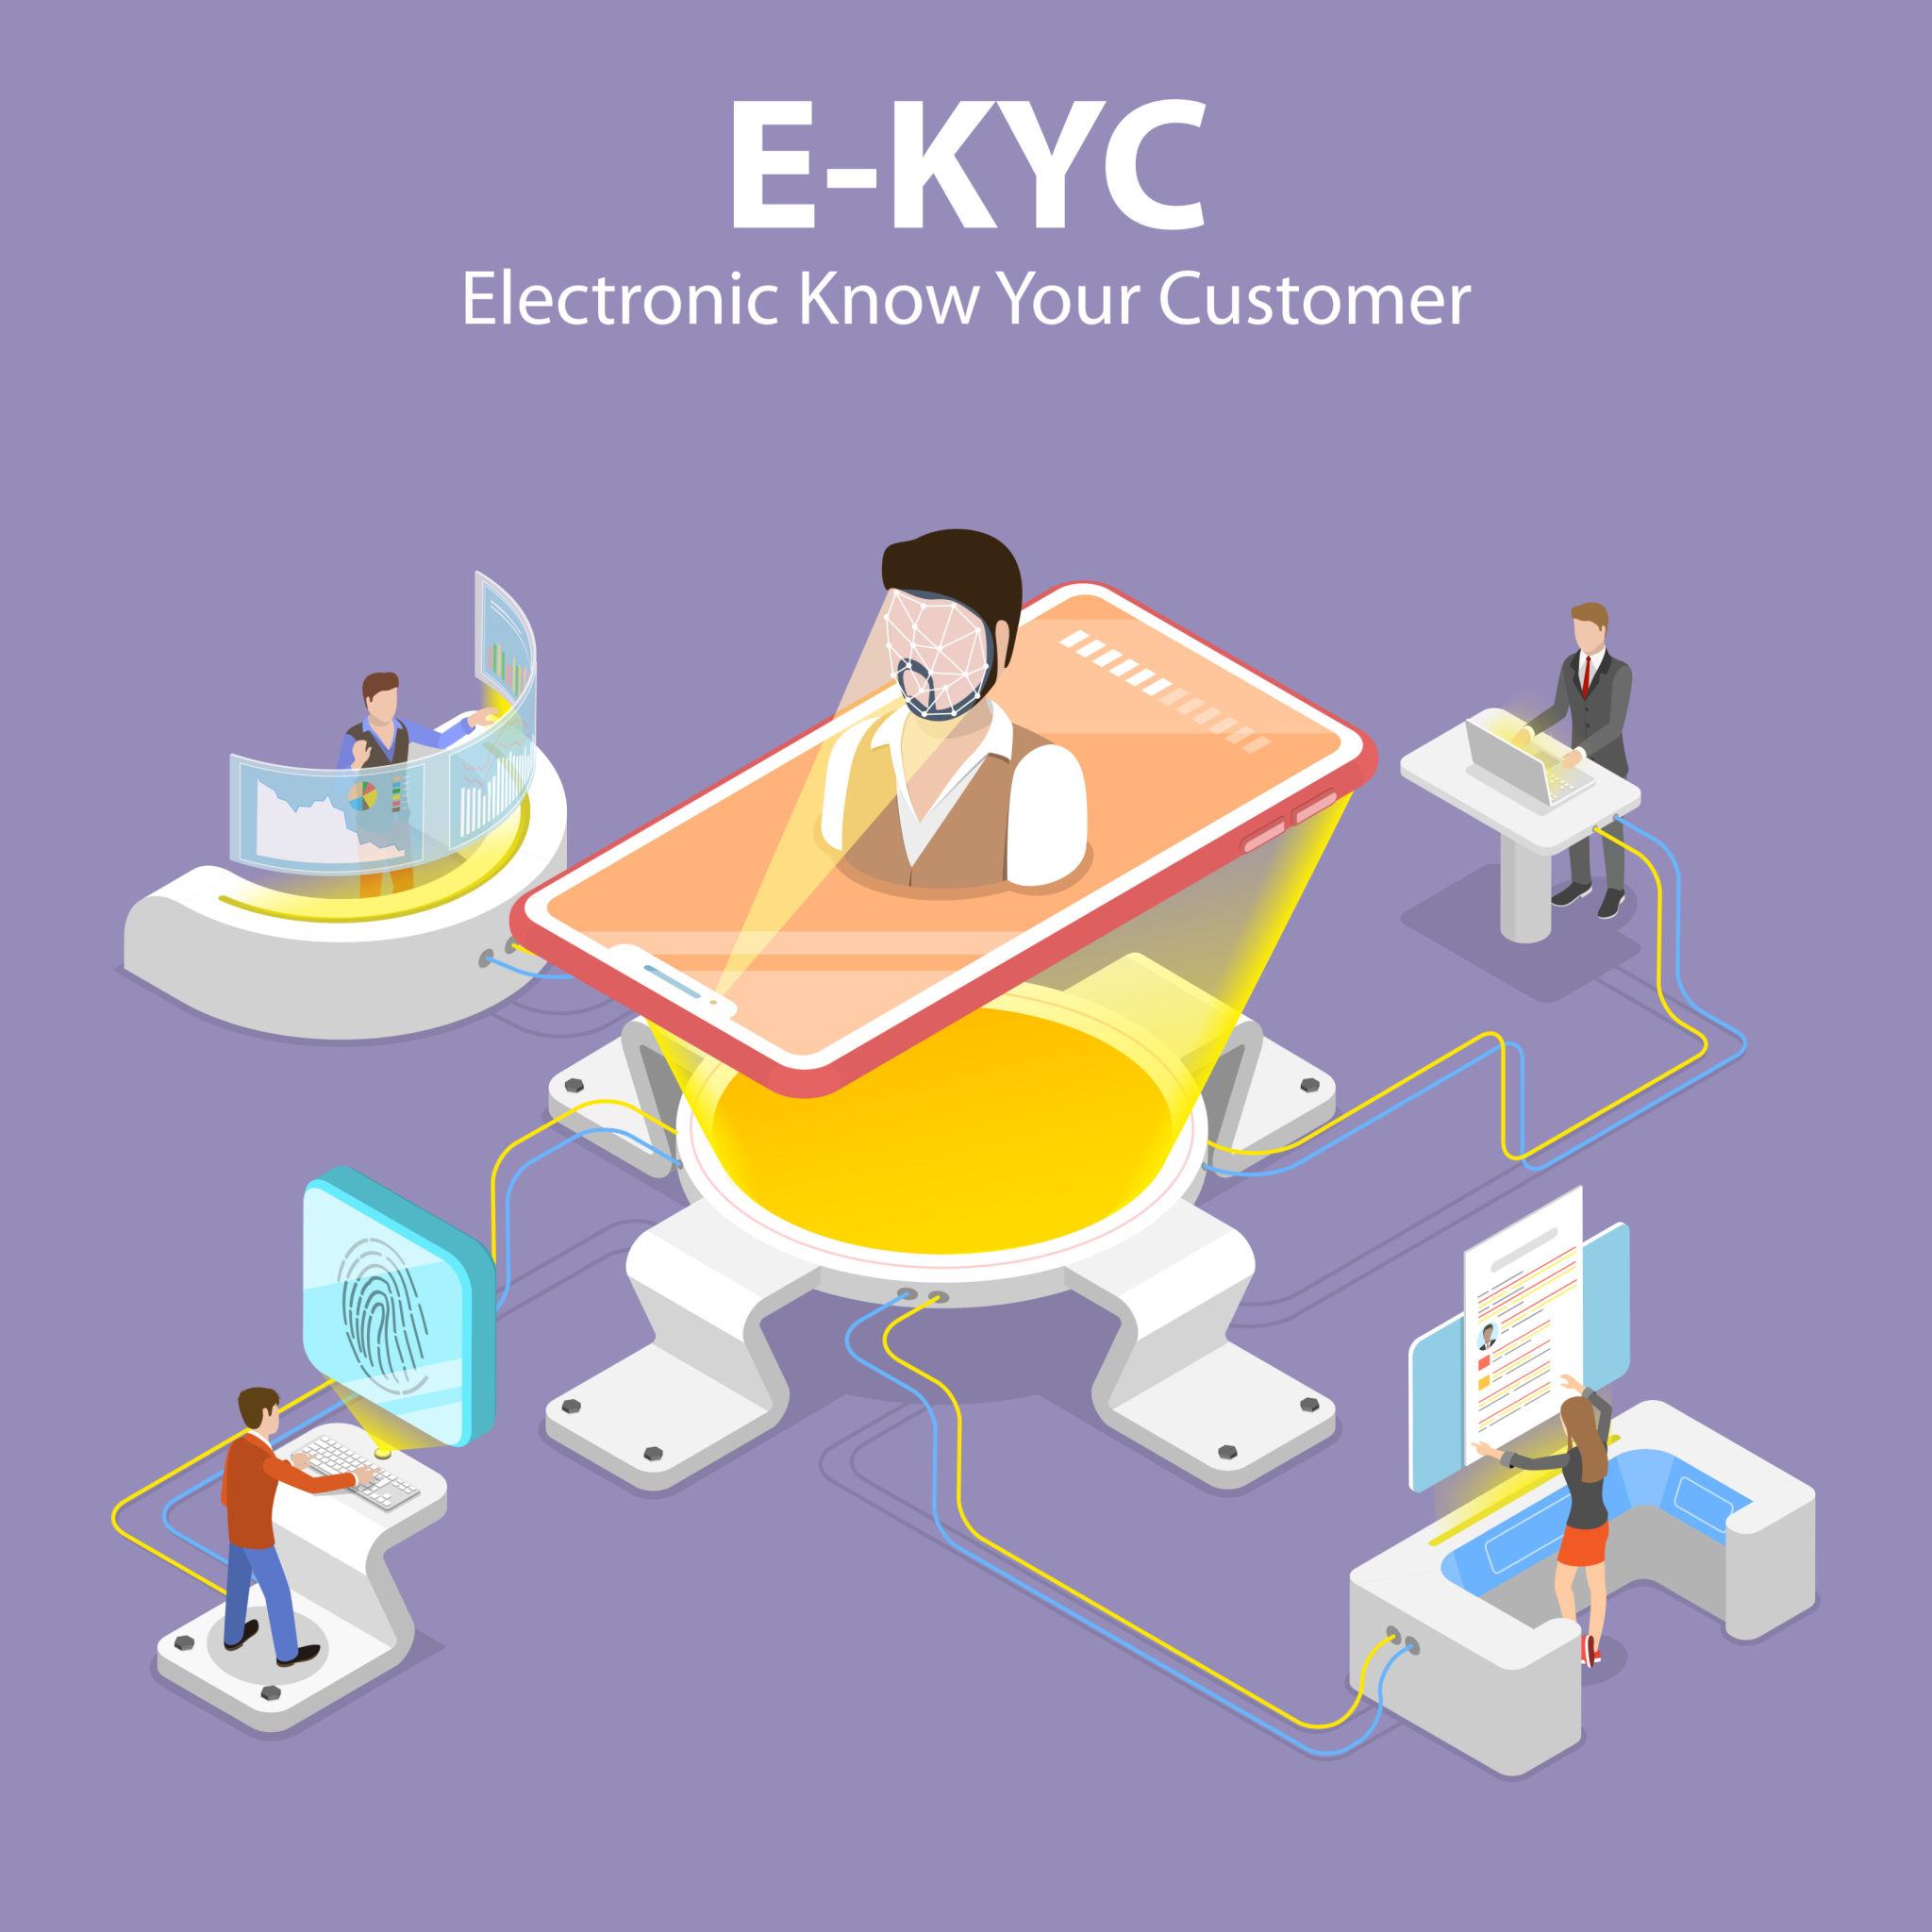 3D Isometric Flat Vector Concept of eKYC - Electronic Know Your Customer, Anti-Money Laundering Guidelines, Process of Minimizing Financial Risks in Business Relationship.